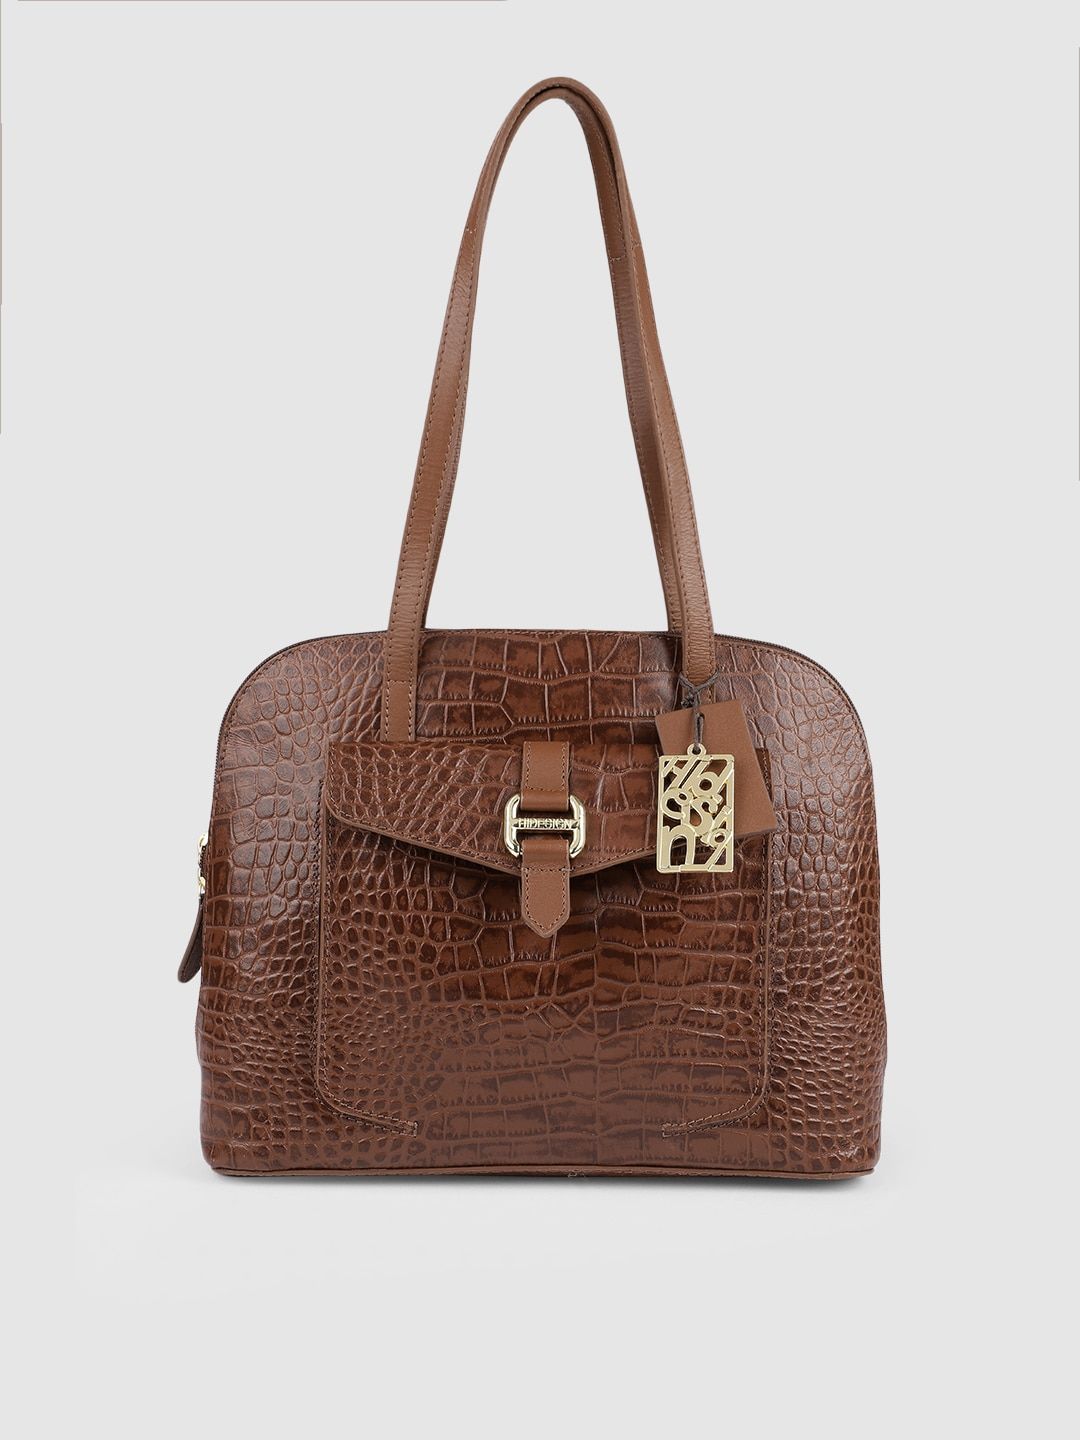 Hidesign Brown Animal Textured Leather Shoulder Bag Price in India